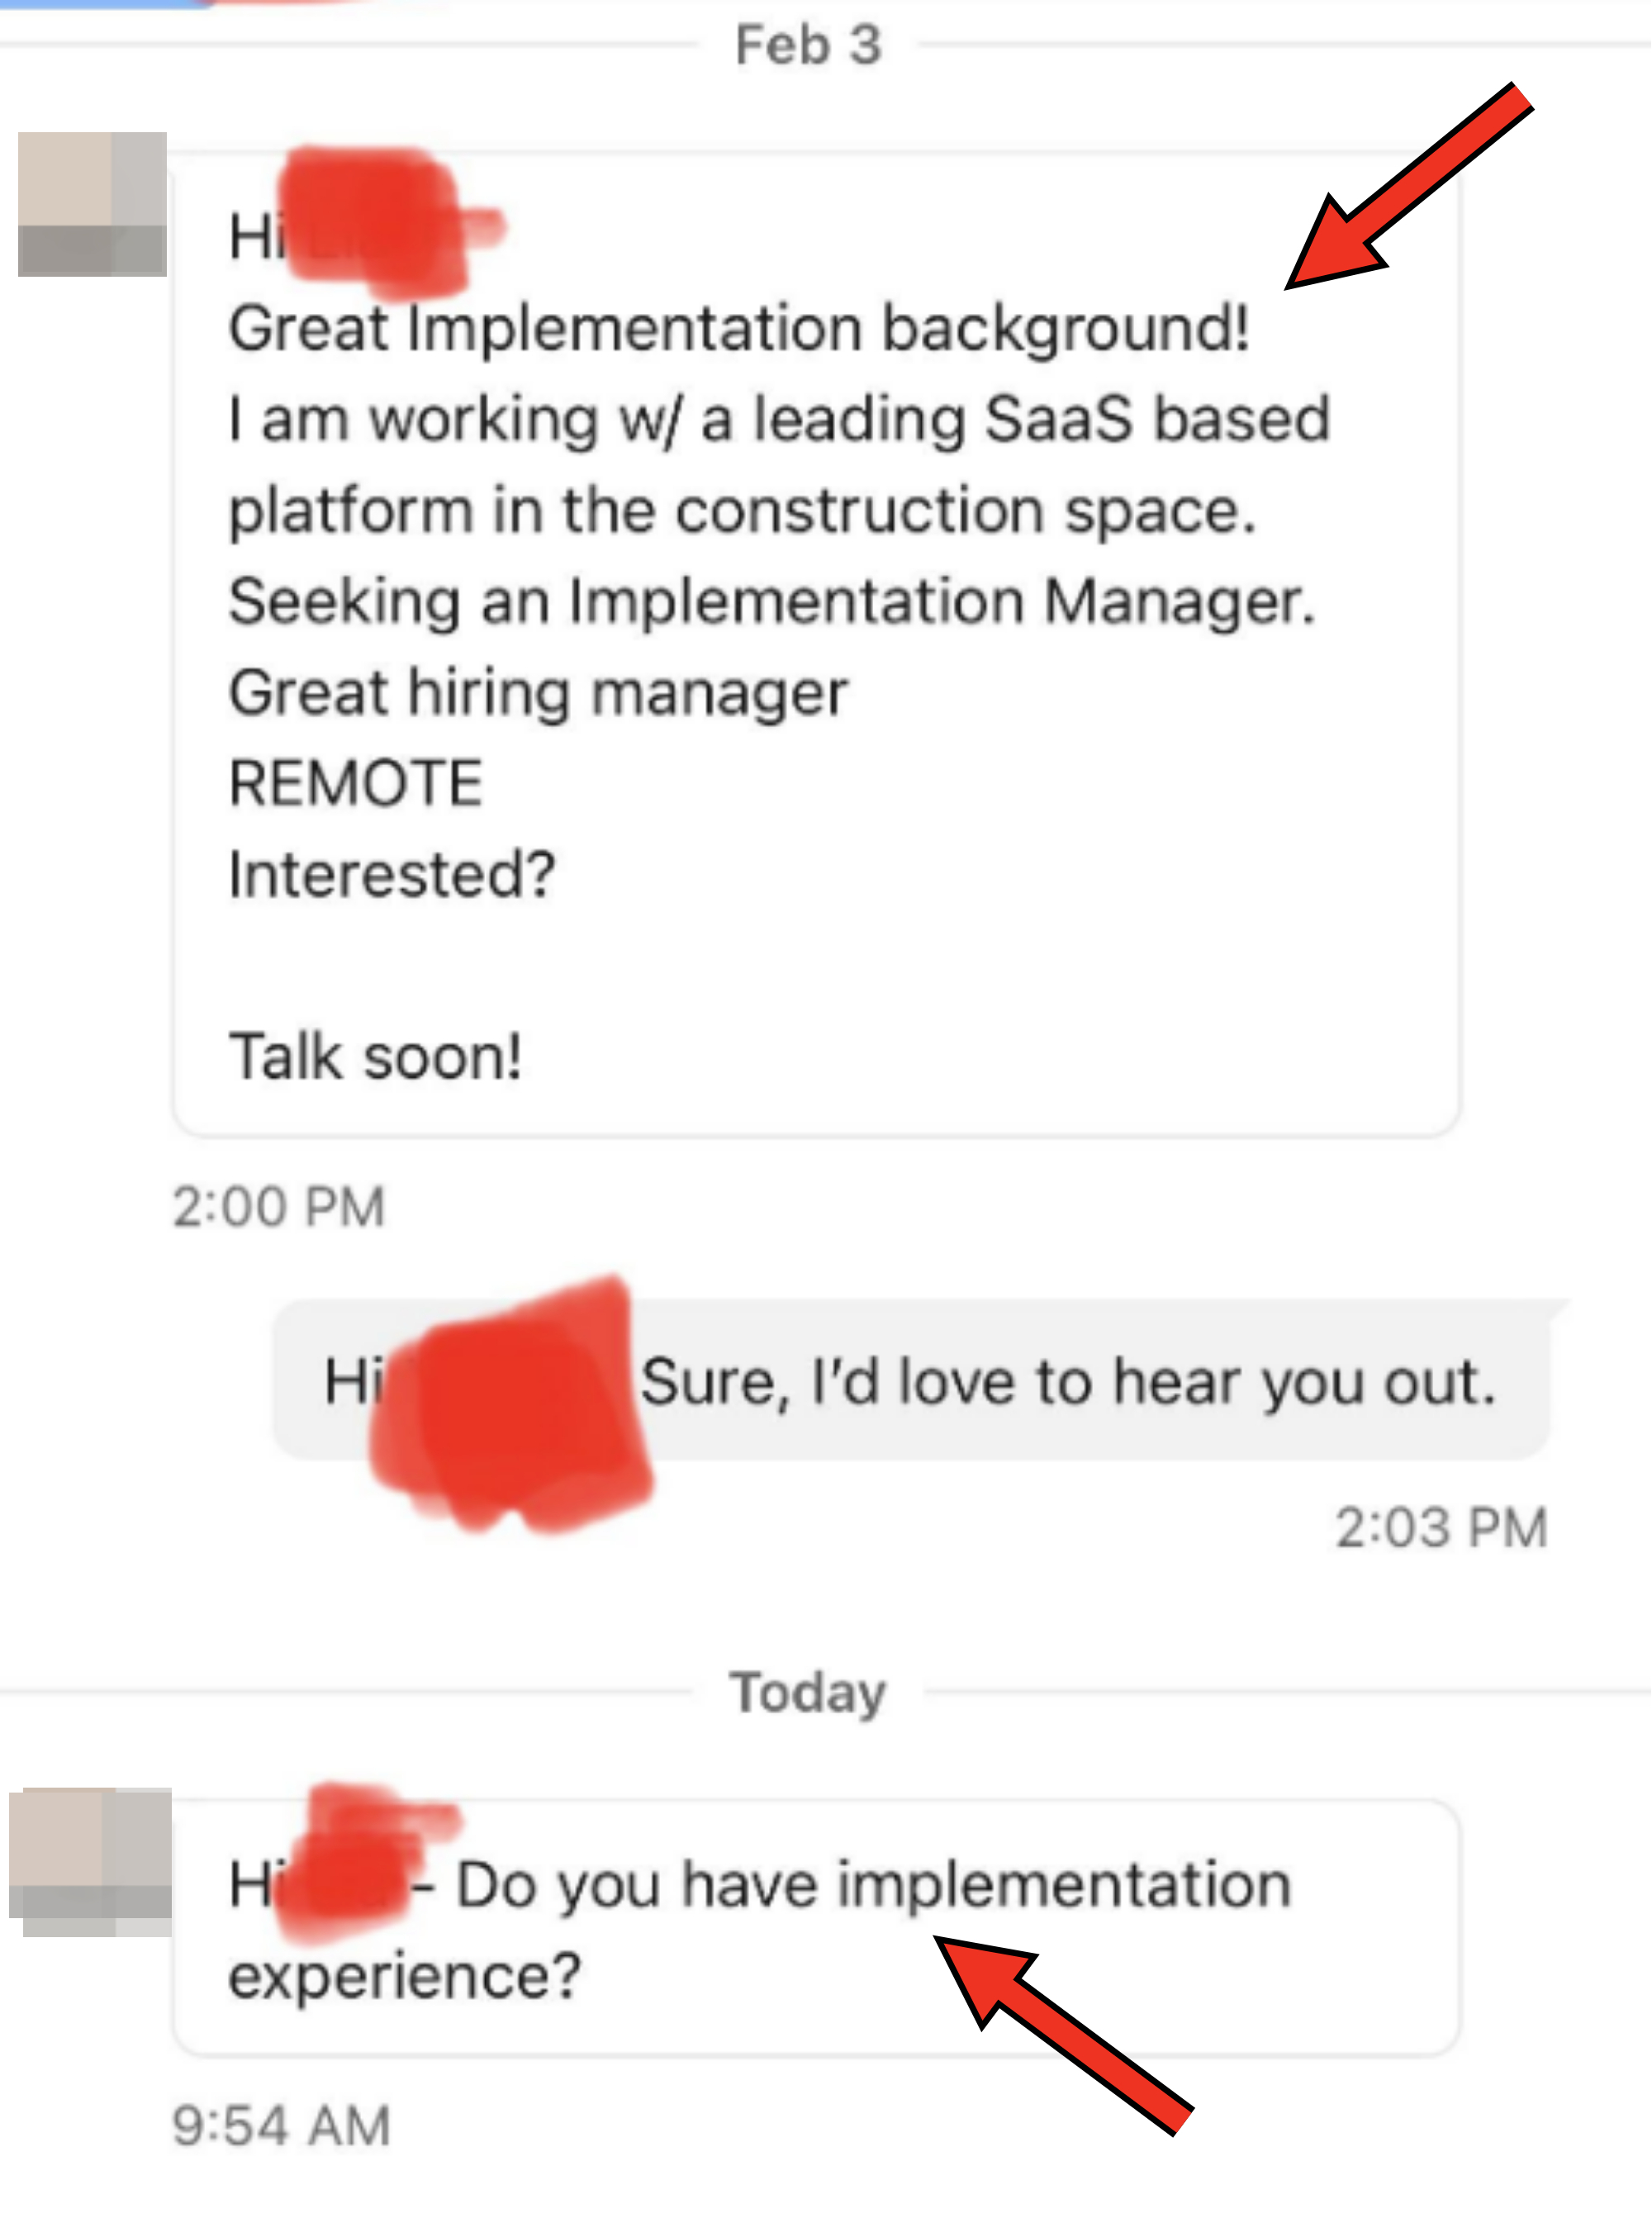 &quot;Do you have implementation experience?&quot;